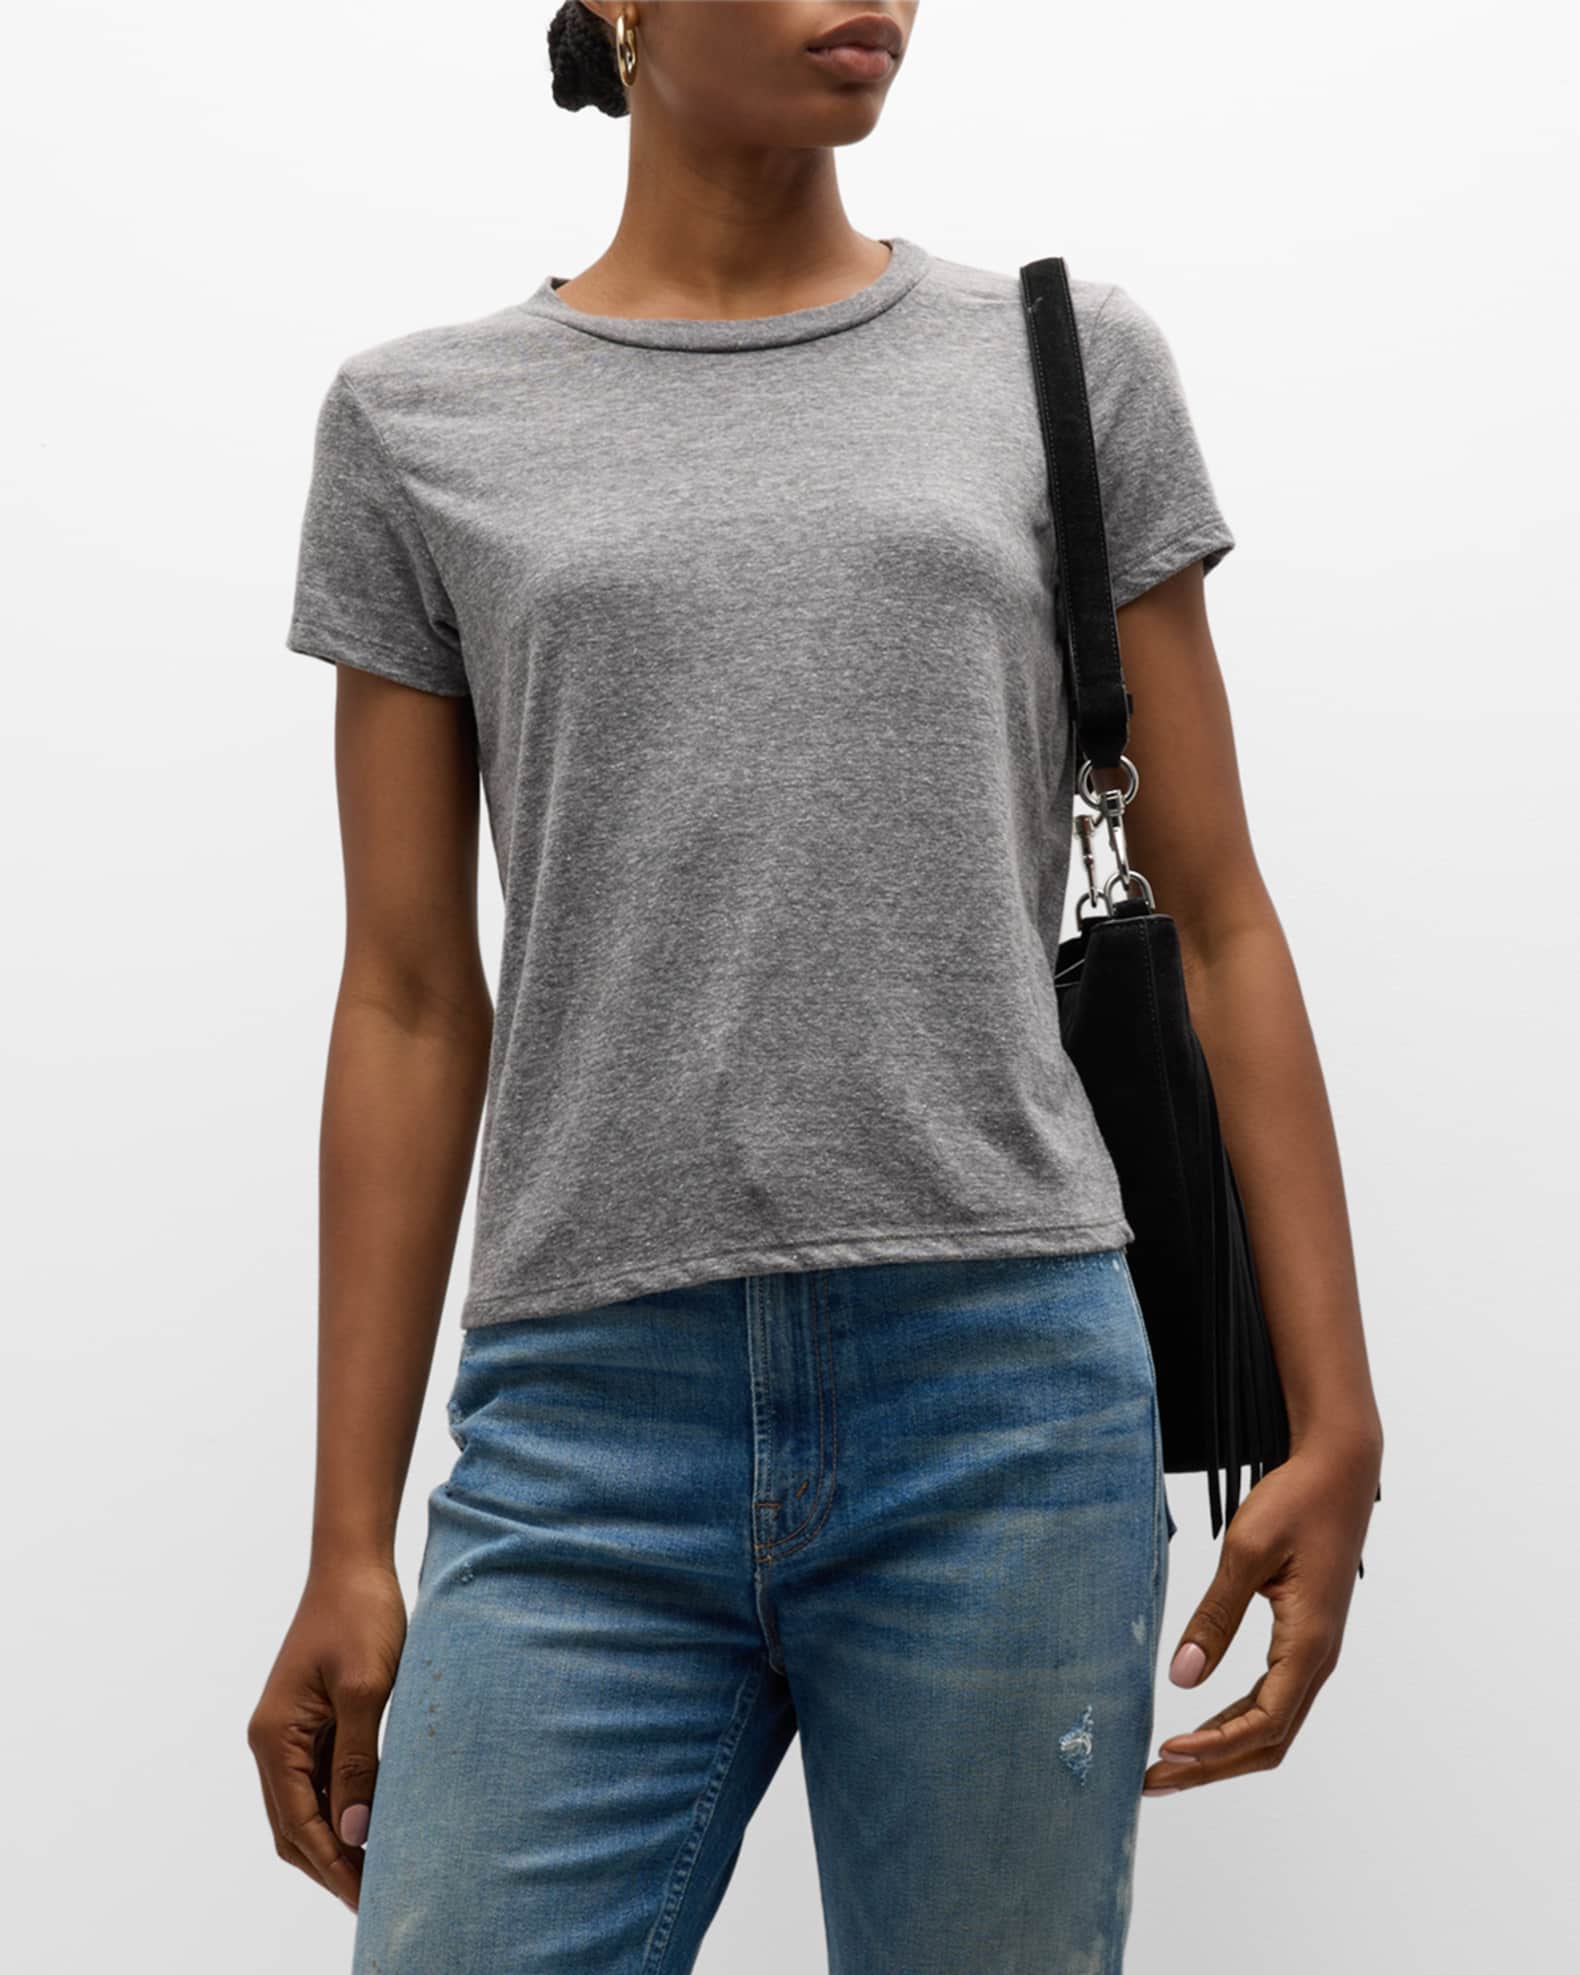 MOTHER The Lil Goodie Goodie Cotton Crewneck Tee | Neiman Marcus